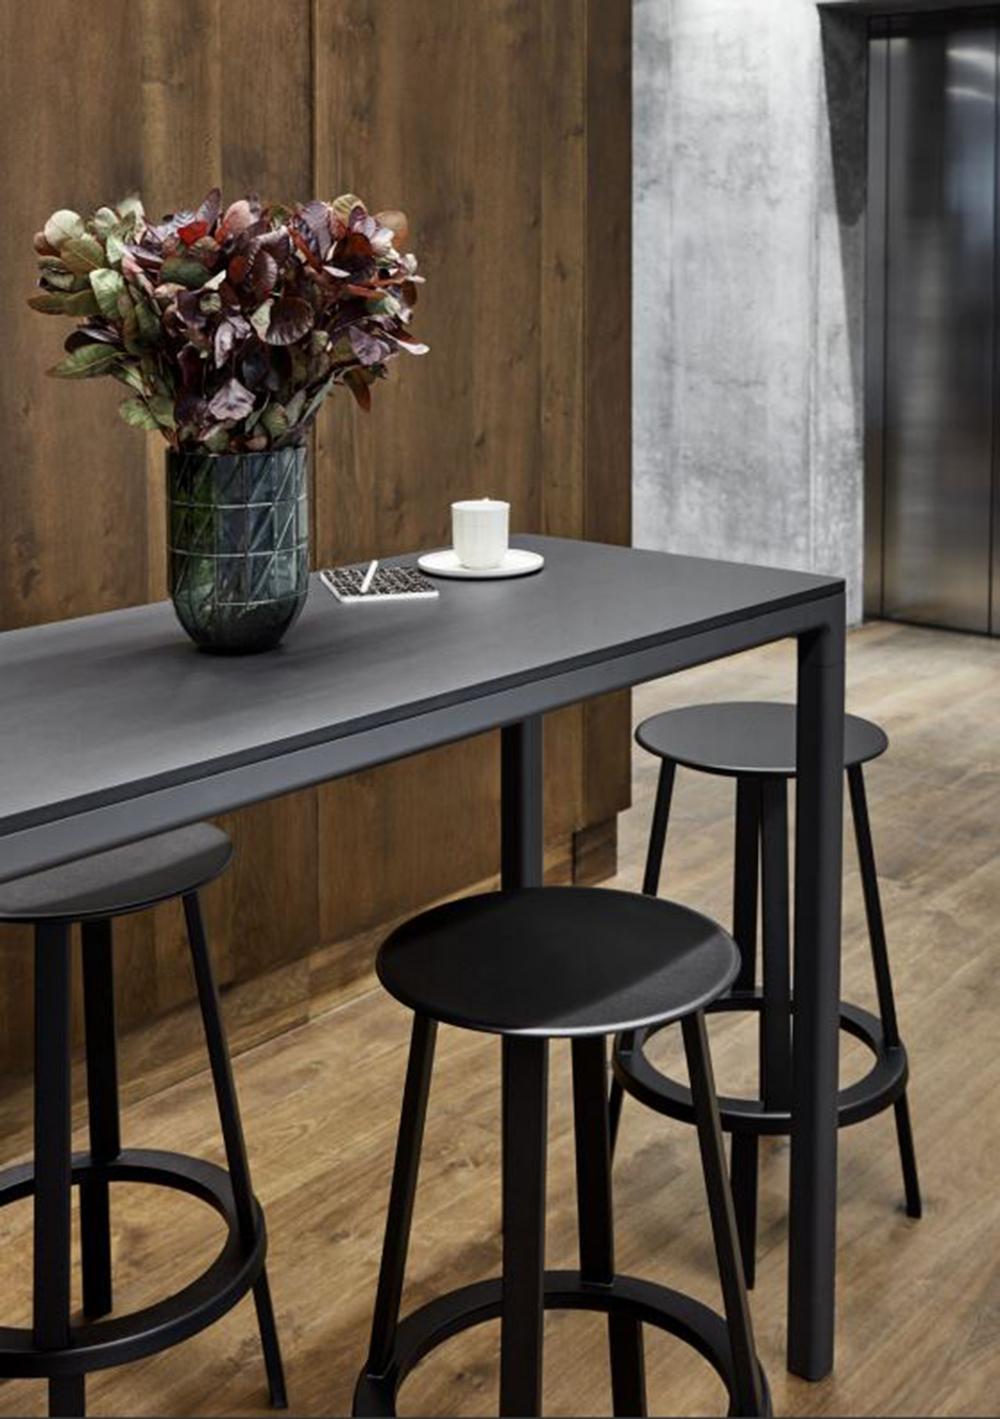 The Revolver bar stool is positioned on a bearing mechanism that enables the seat and footing to rotate 360 degrees. 
The slim, slightly dished seat features curved edges for additional comfort, while the footrest provides support and the weighty